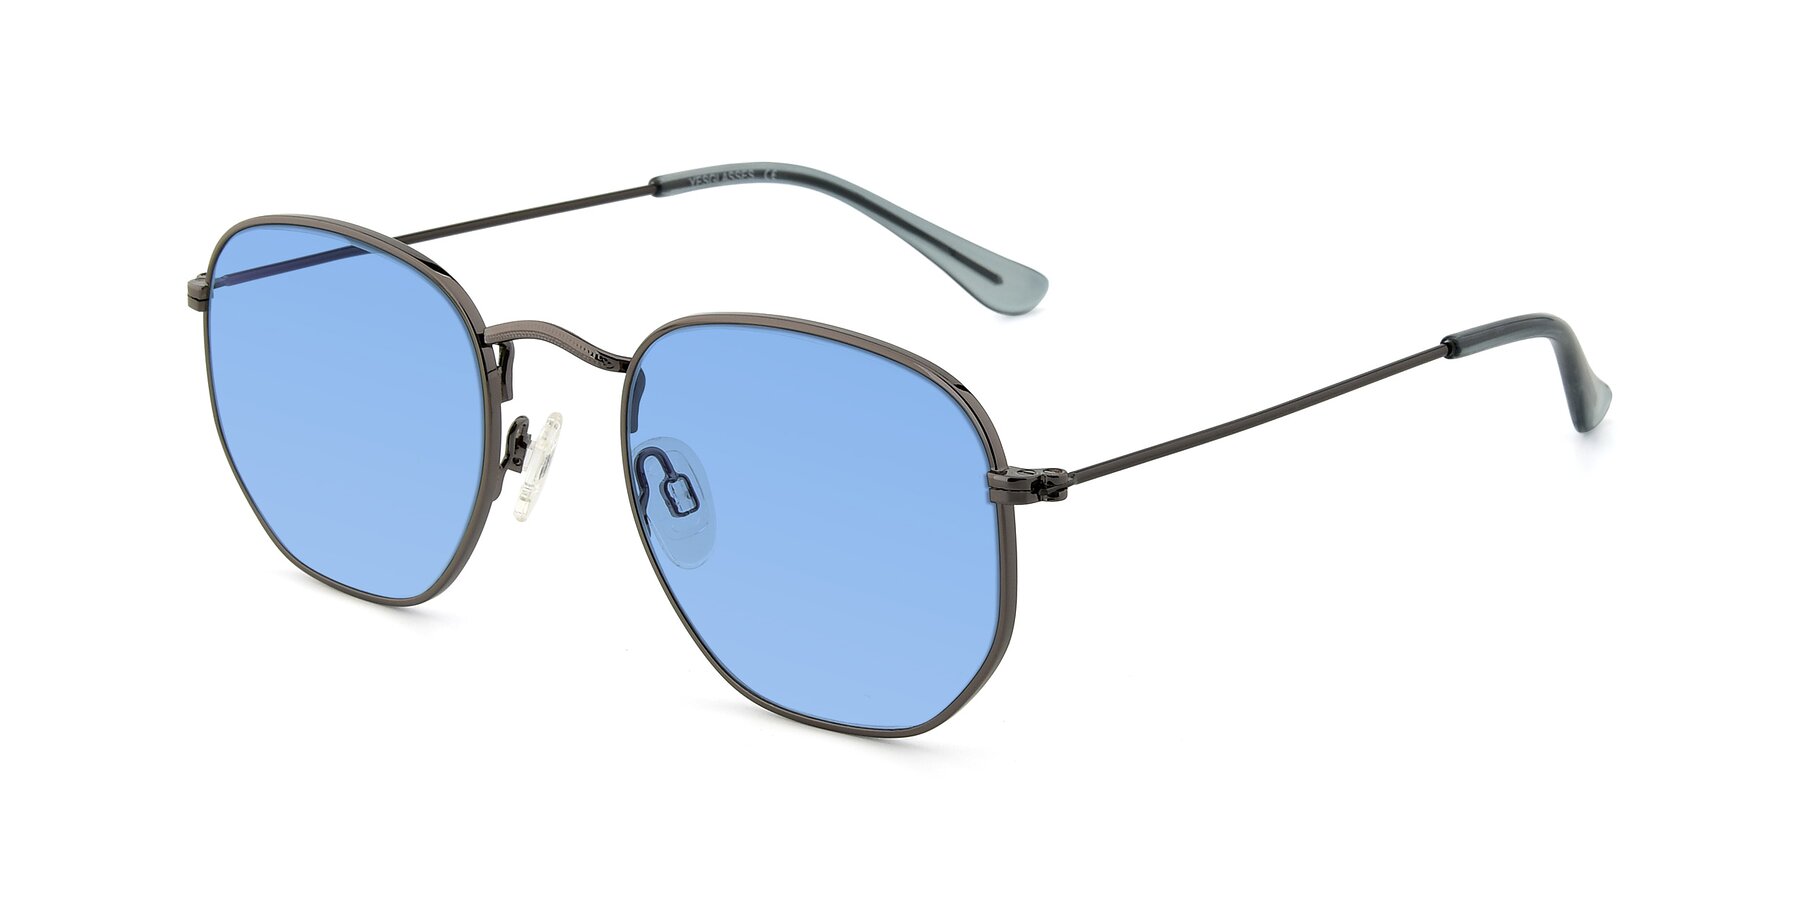 Angle of SSR1943 in Grey with Medium Blue Tinted Lenses